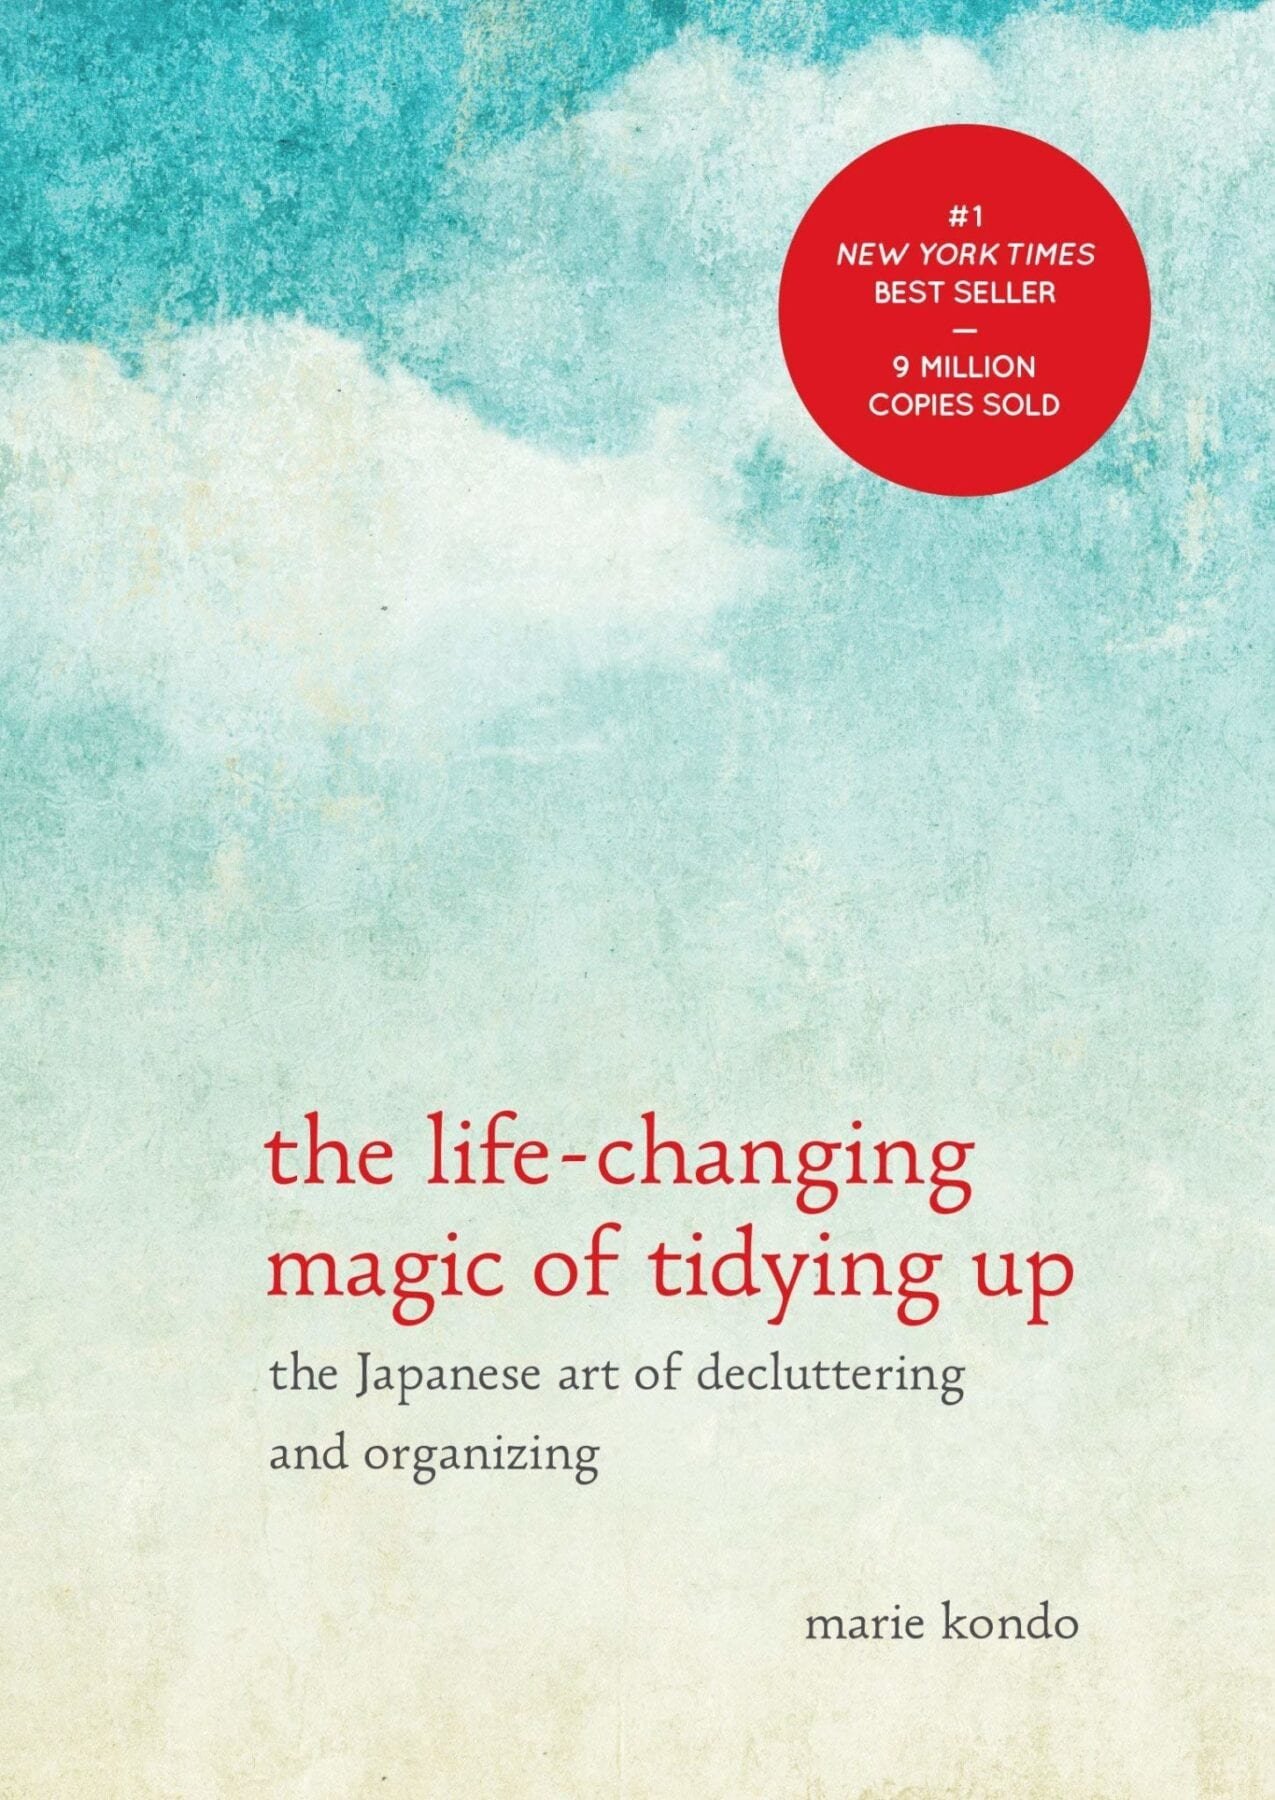 self help book; the life changing magic of tidying up